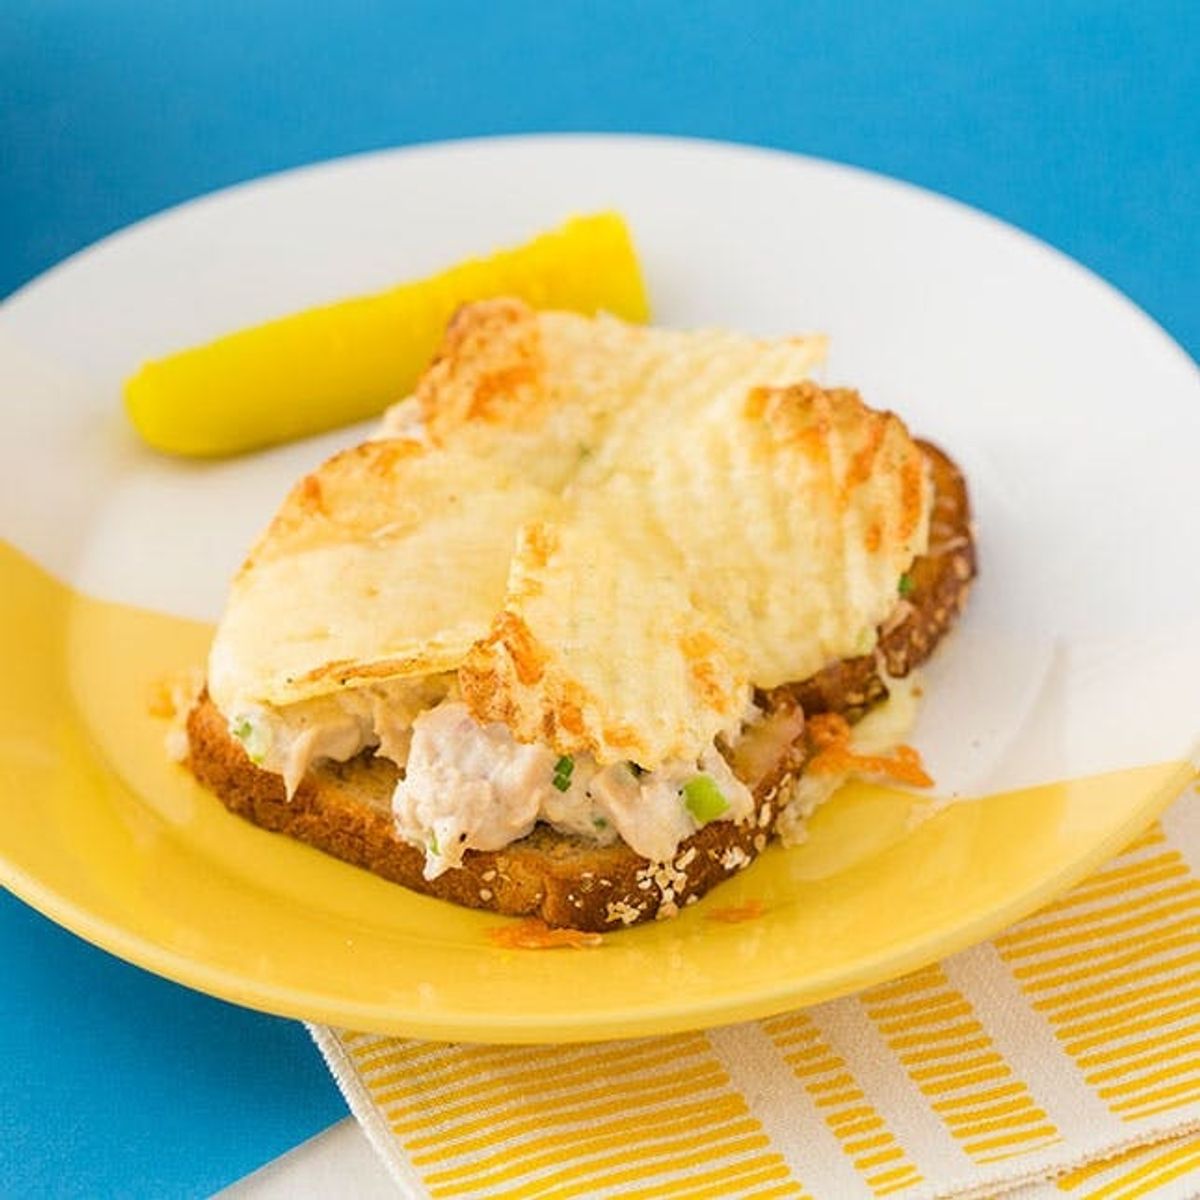 How to Make the Ultimate Open-Faced Tuna Melt